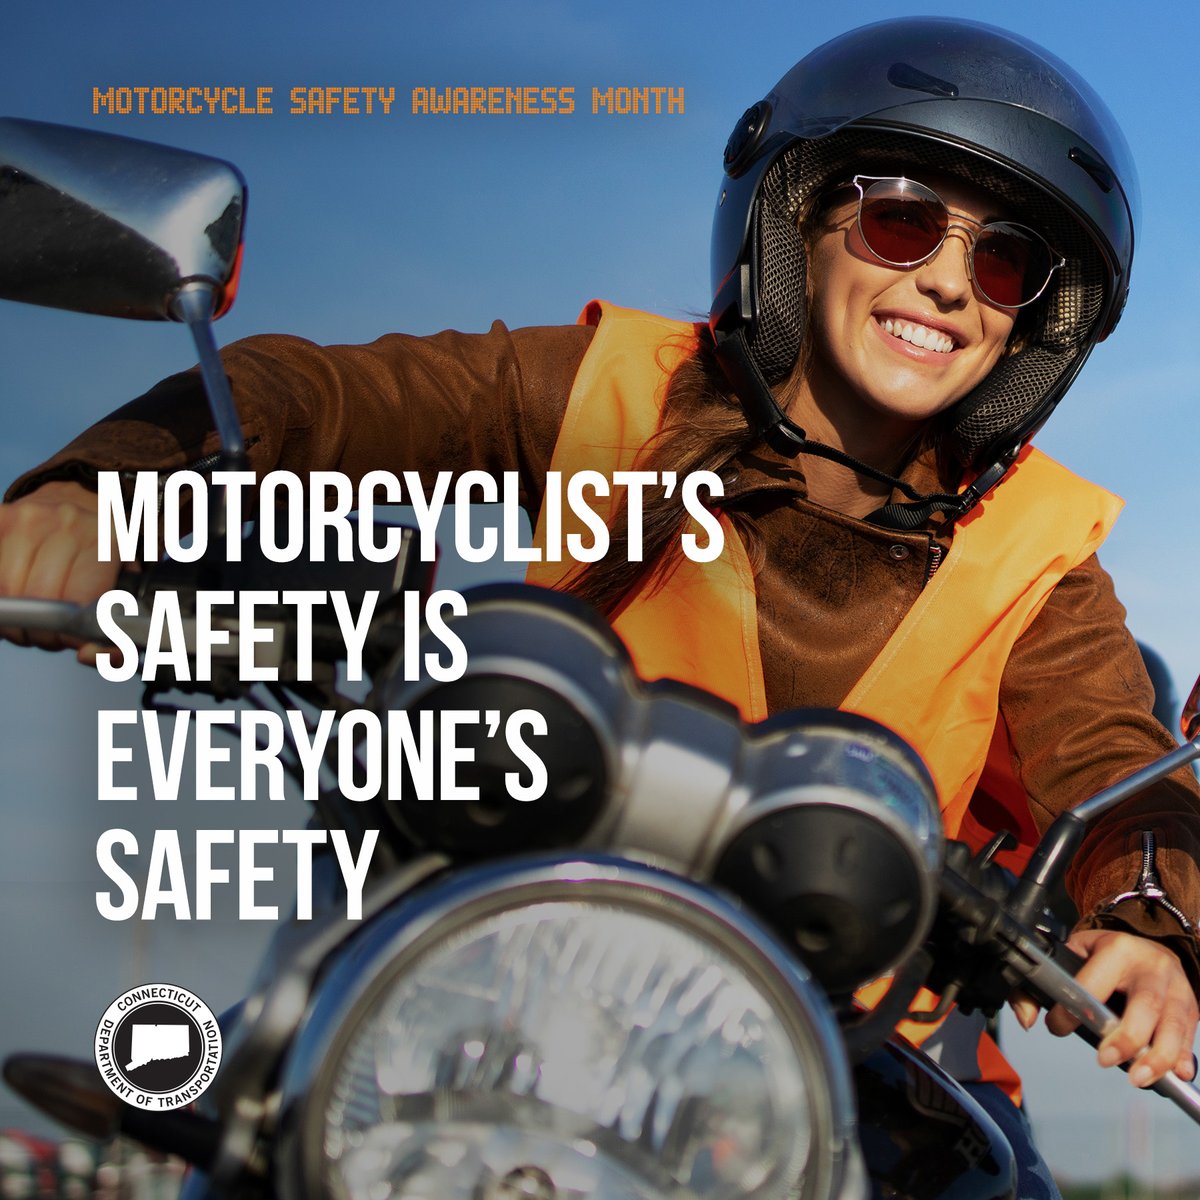 Let's talk motorcycle safety: In 2022, 6,218 motorcyclists lost their lives in traffic crashes, comprising 15% of all traffic fatalities. Let's raise awareness and prioritize safe riding practices.

#CTDOT #MotorcycleSafety #RideSafe #RoadSafety